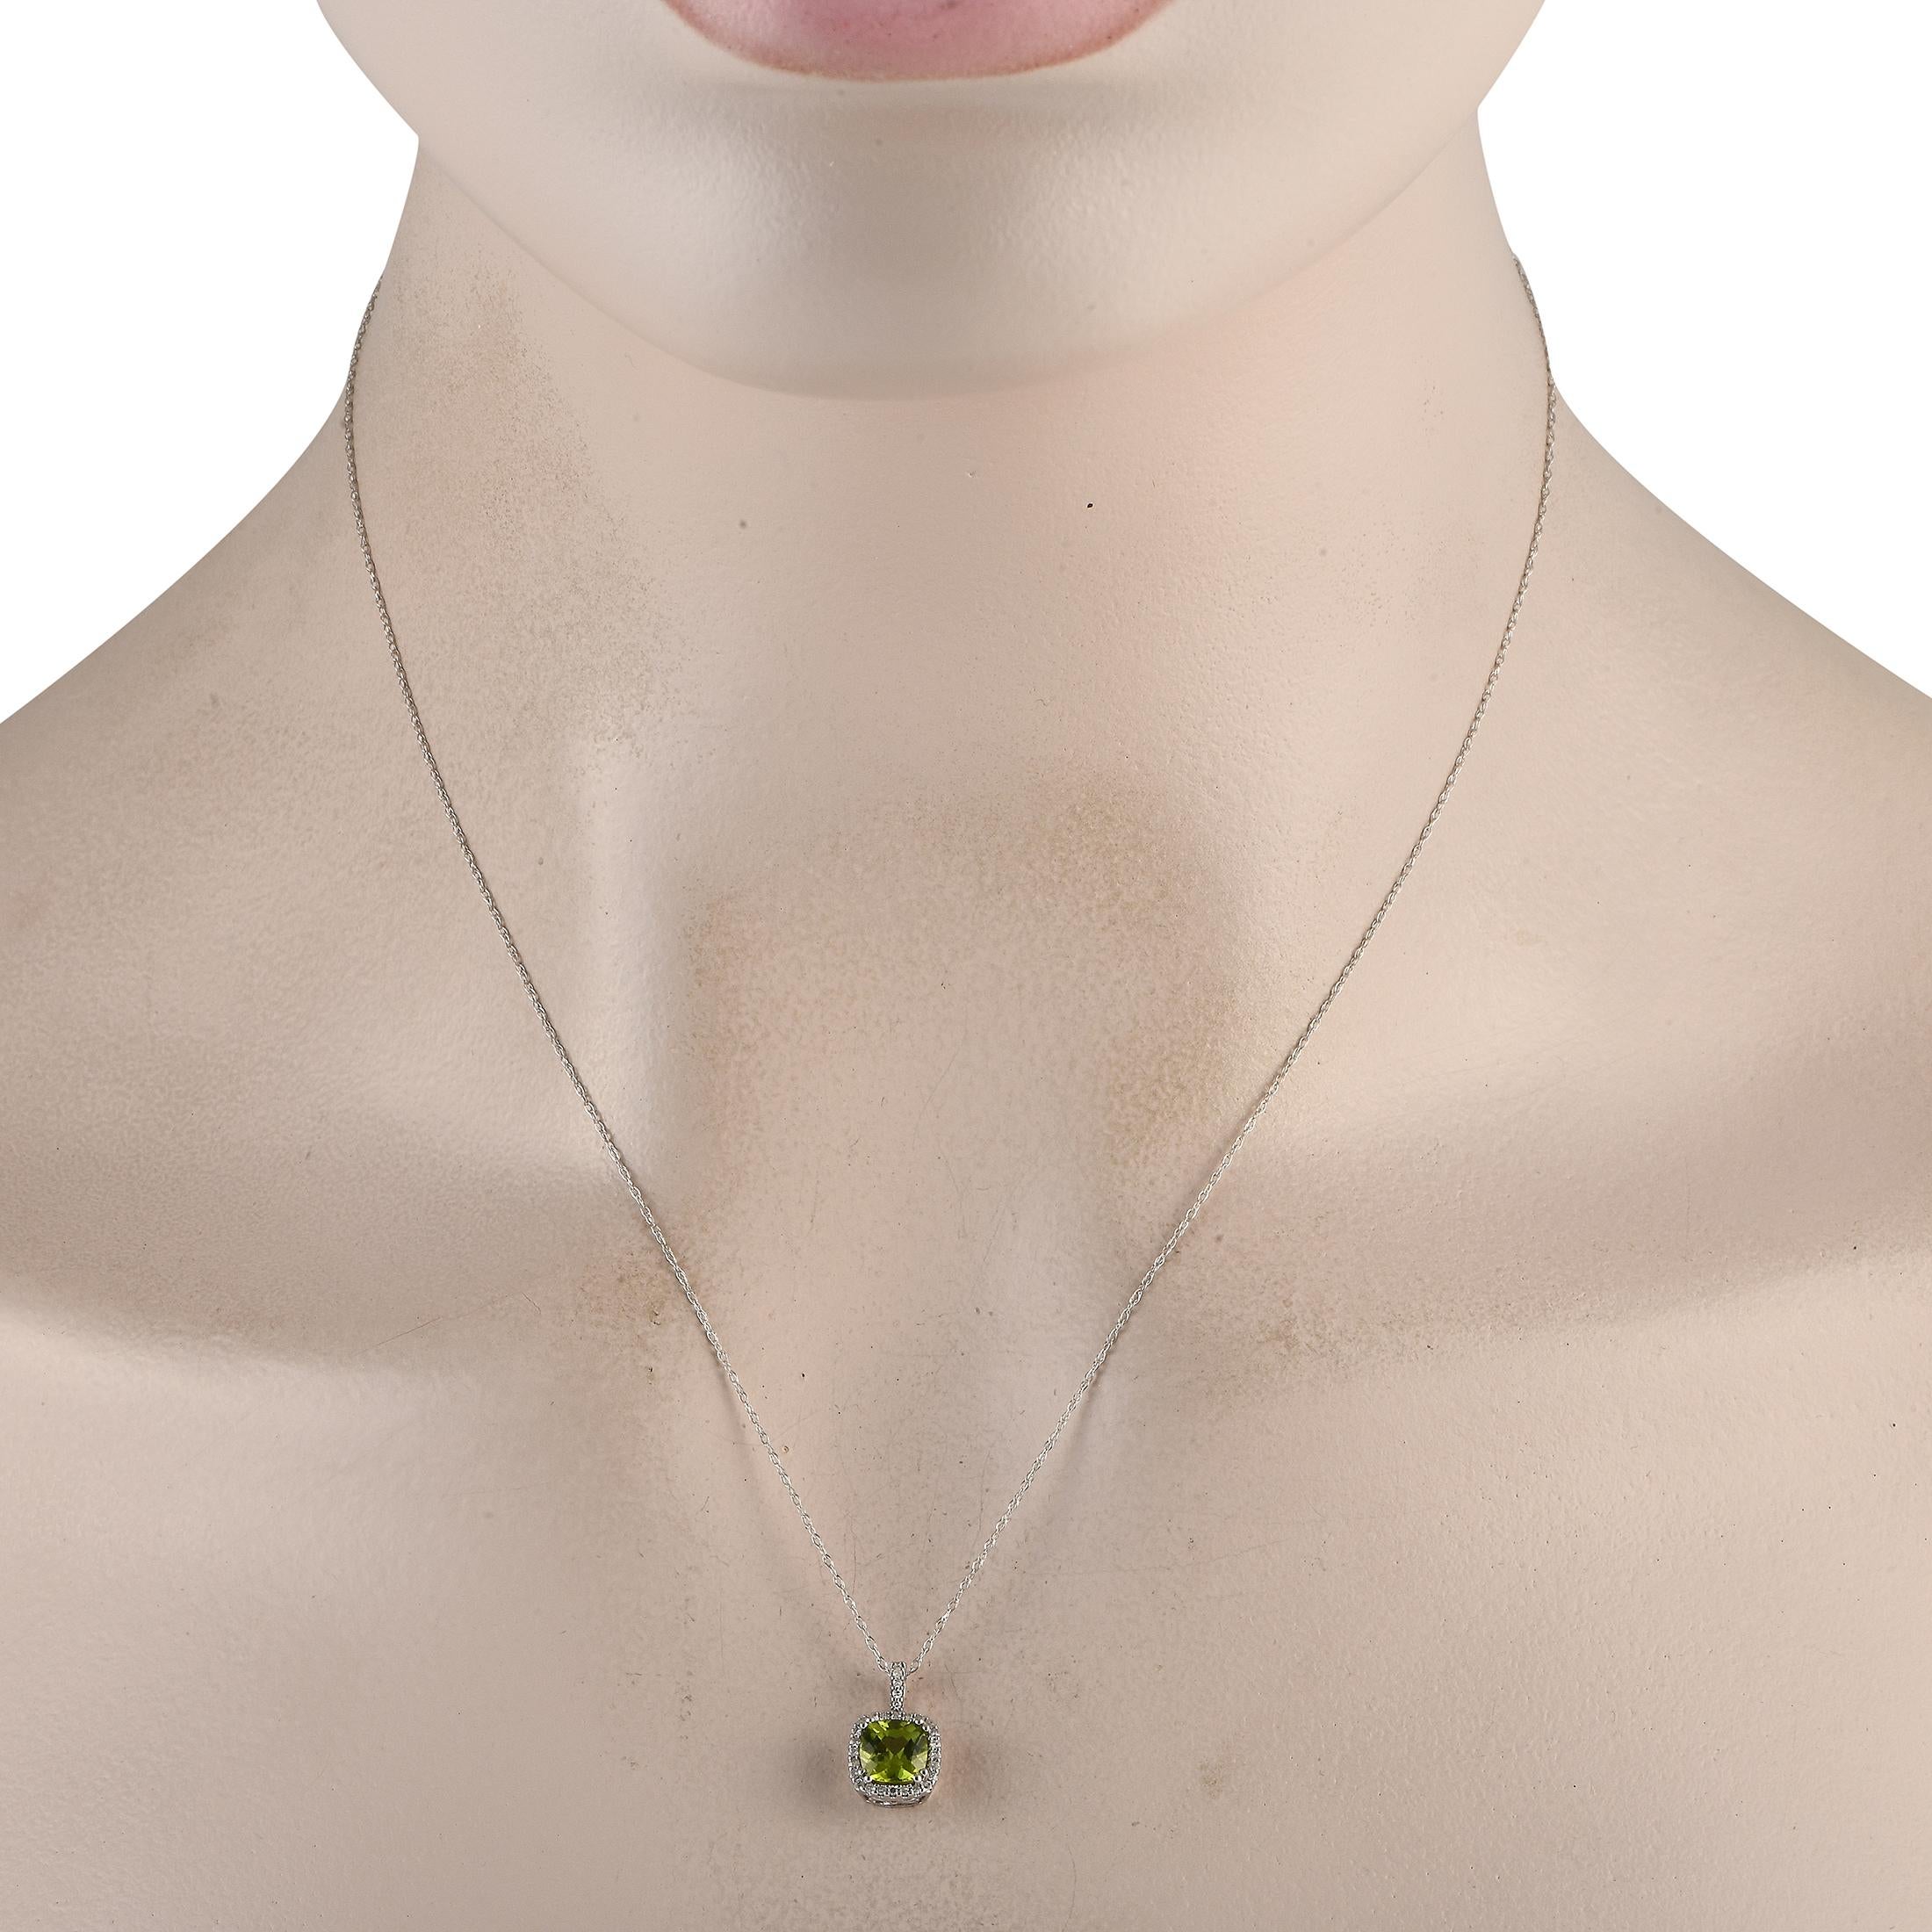 This luxurious necklace will never go out of style. Suspended from a delicate 18 chain, youll find an opulent 14K white gold pendant measuring 0.50 long by 0.25 wide. At the center, a stunning Peridot gemstone comes to life thanks to sparkling